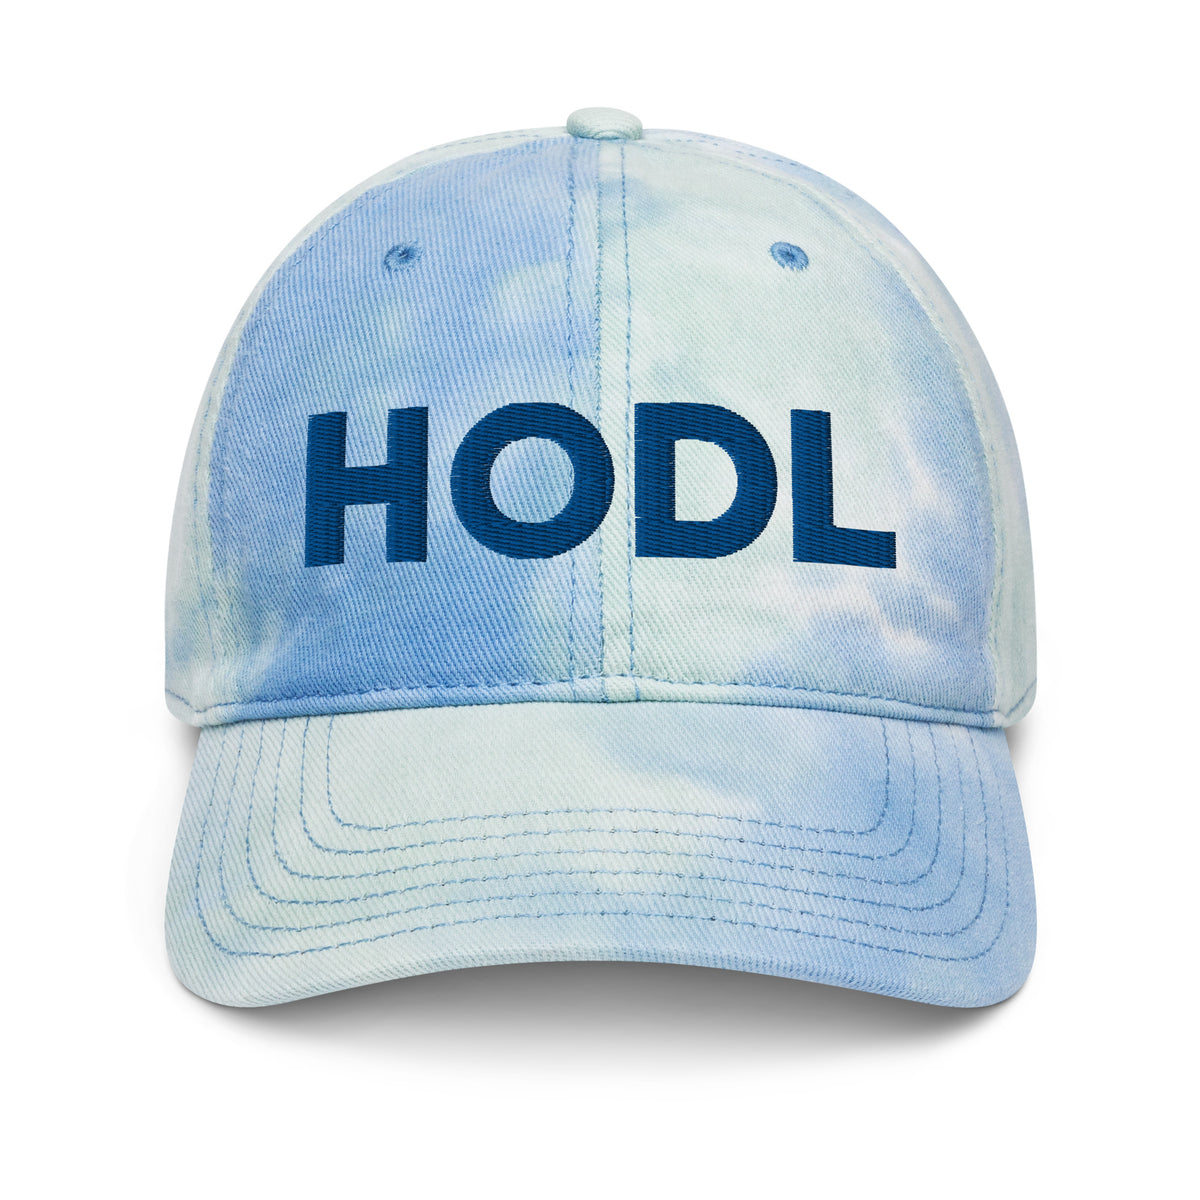 HODL (Blue Embroidery) Bitcoin Tie Dye Hat - fomo21